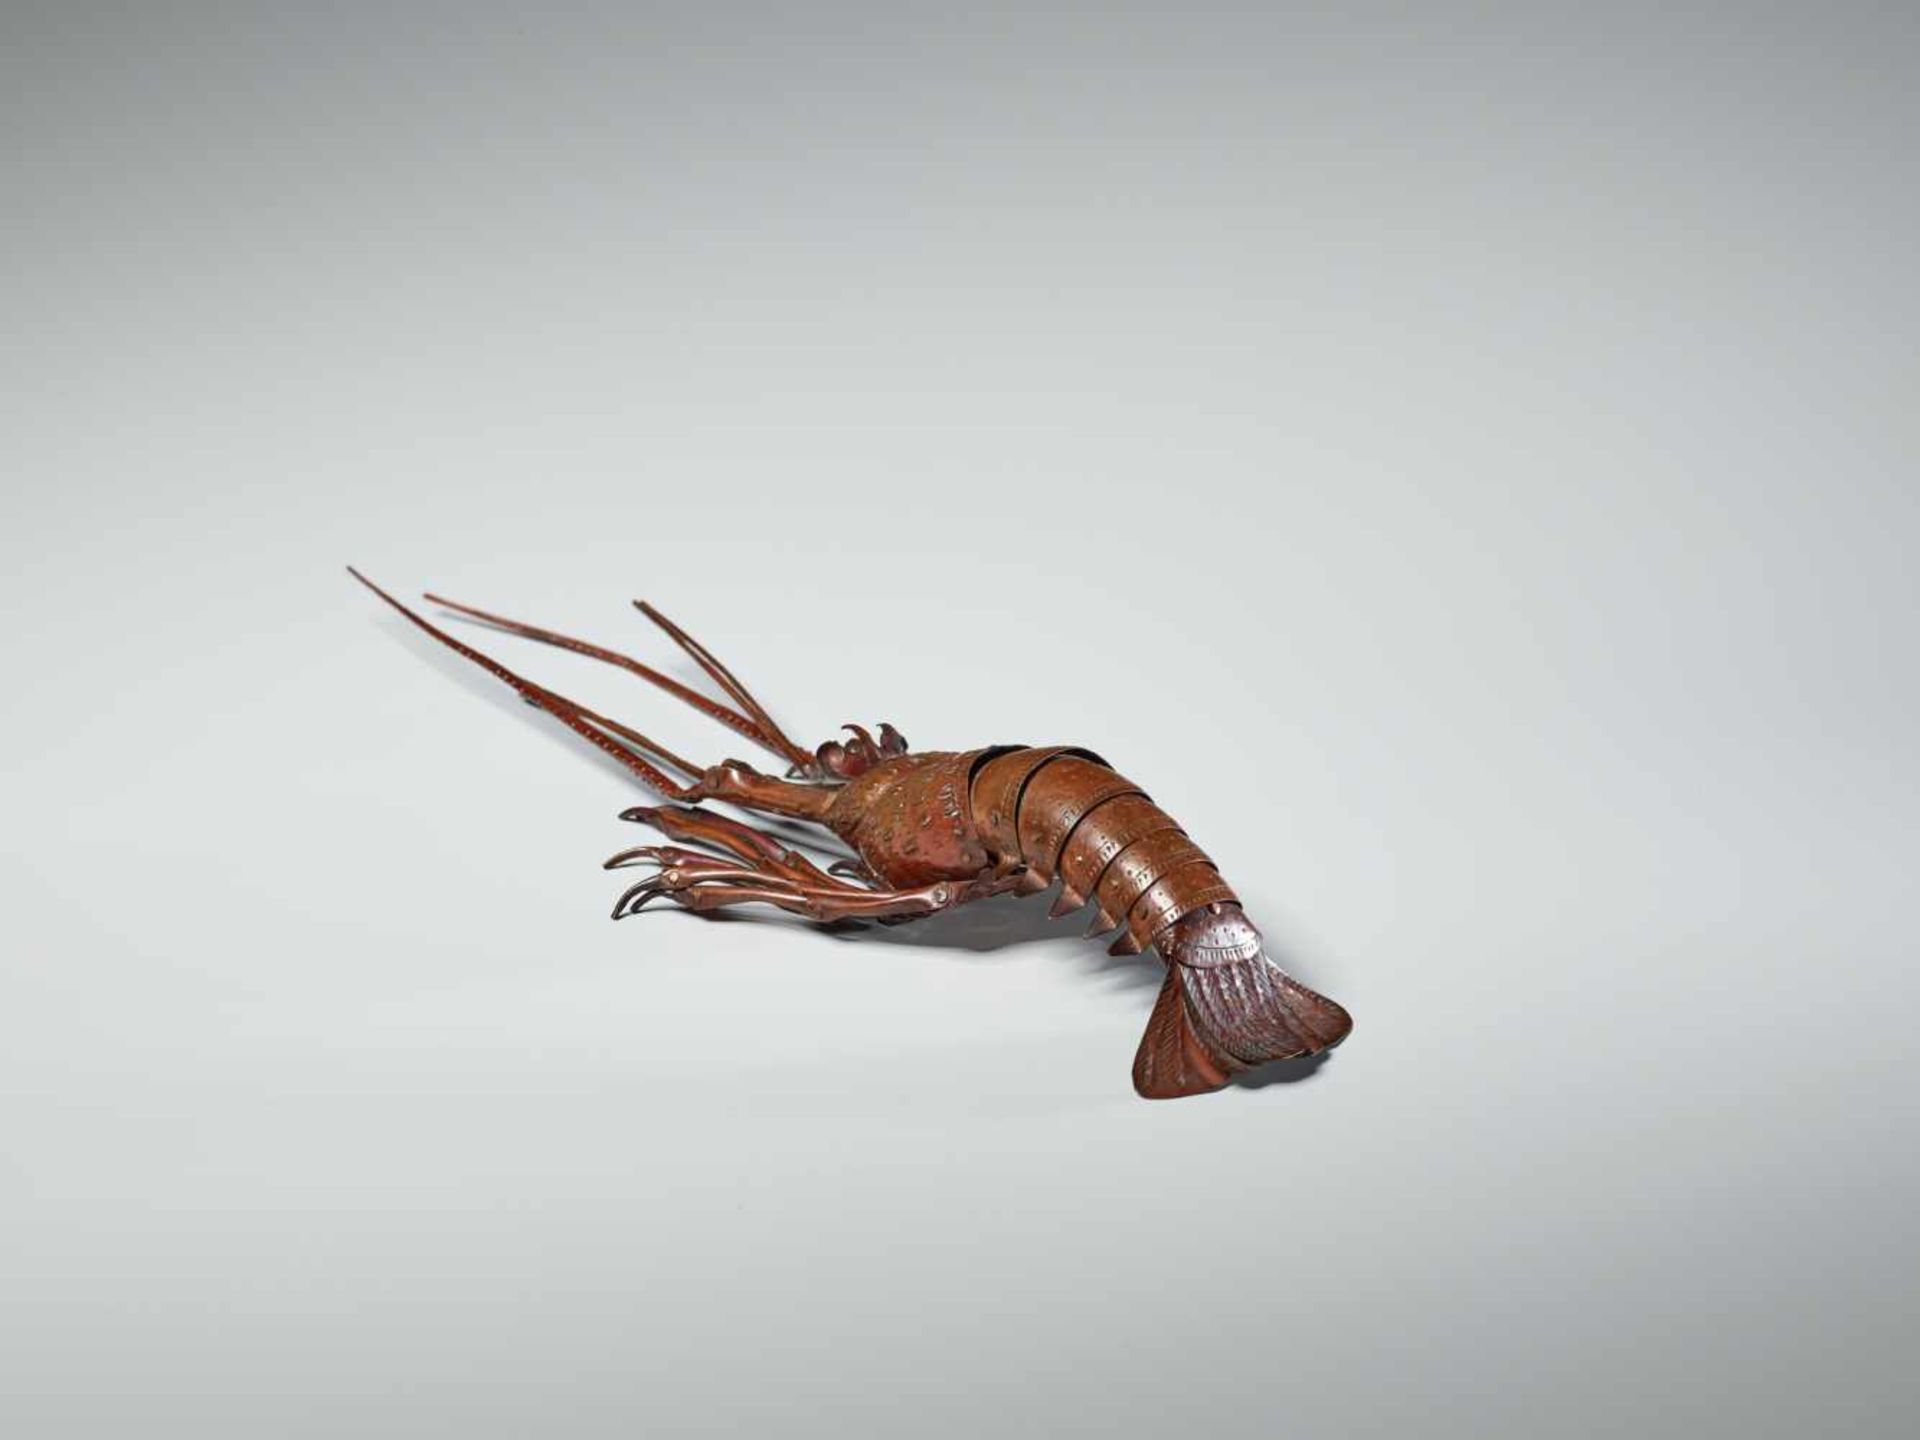 A PAIR OF FULLY ARTICULATED JIZAI OKIMONO DEPICTING EBI (SPINY LOBSTER) BY HIROYOSHICopperJapan, - Image 6 of 15